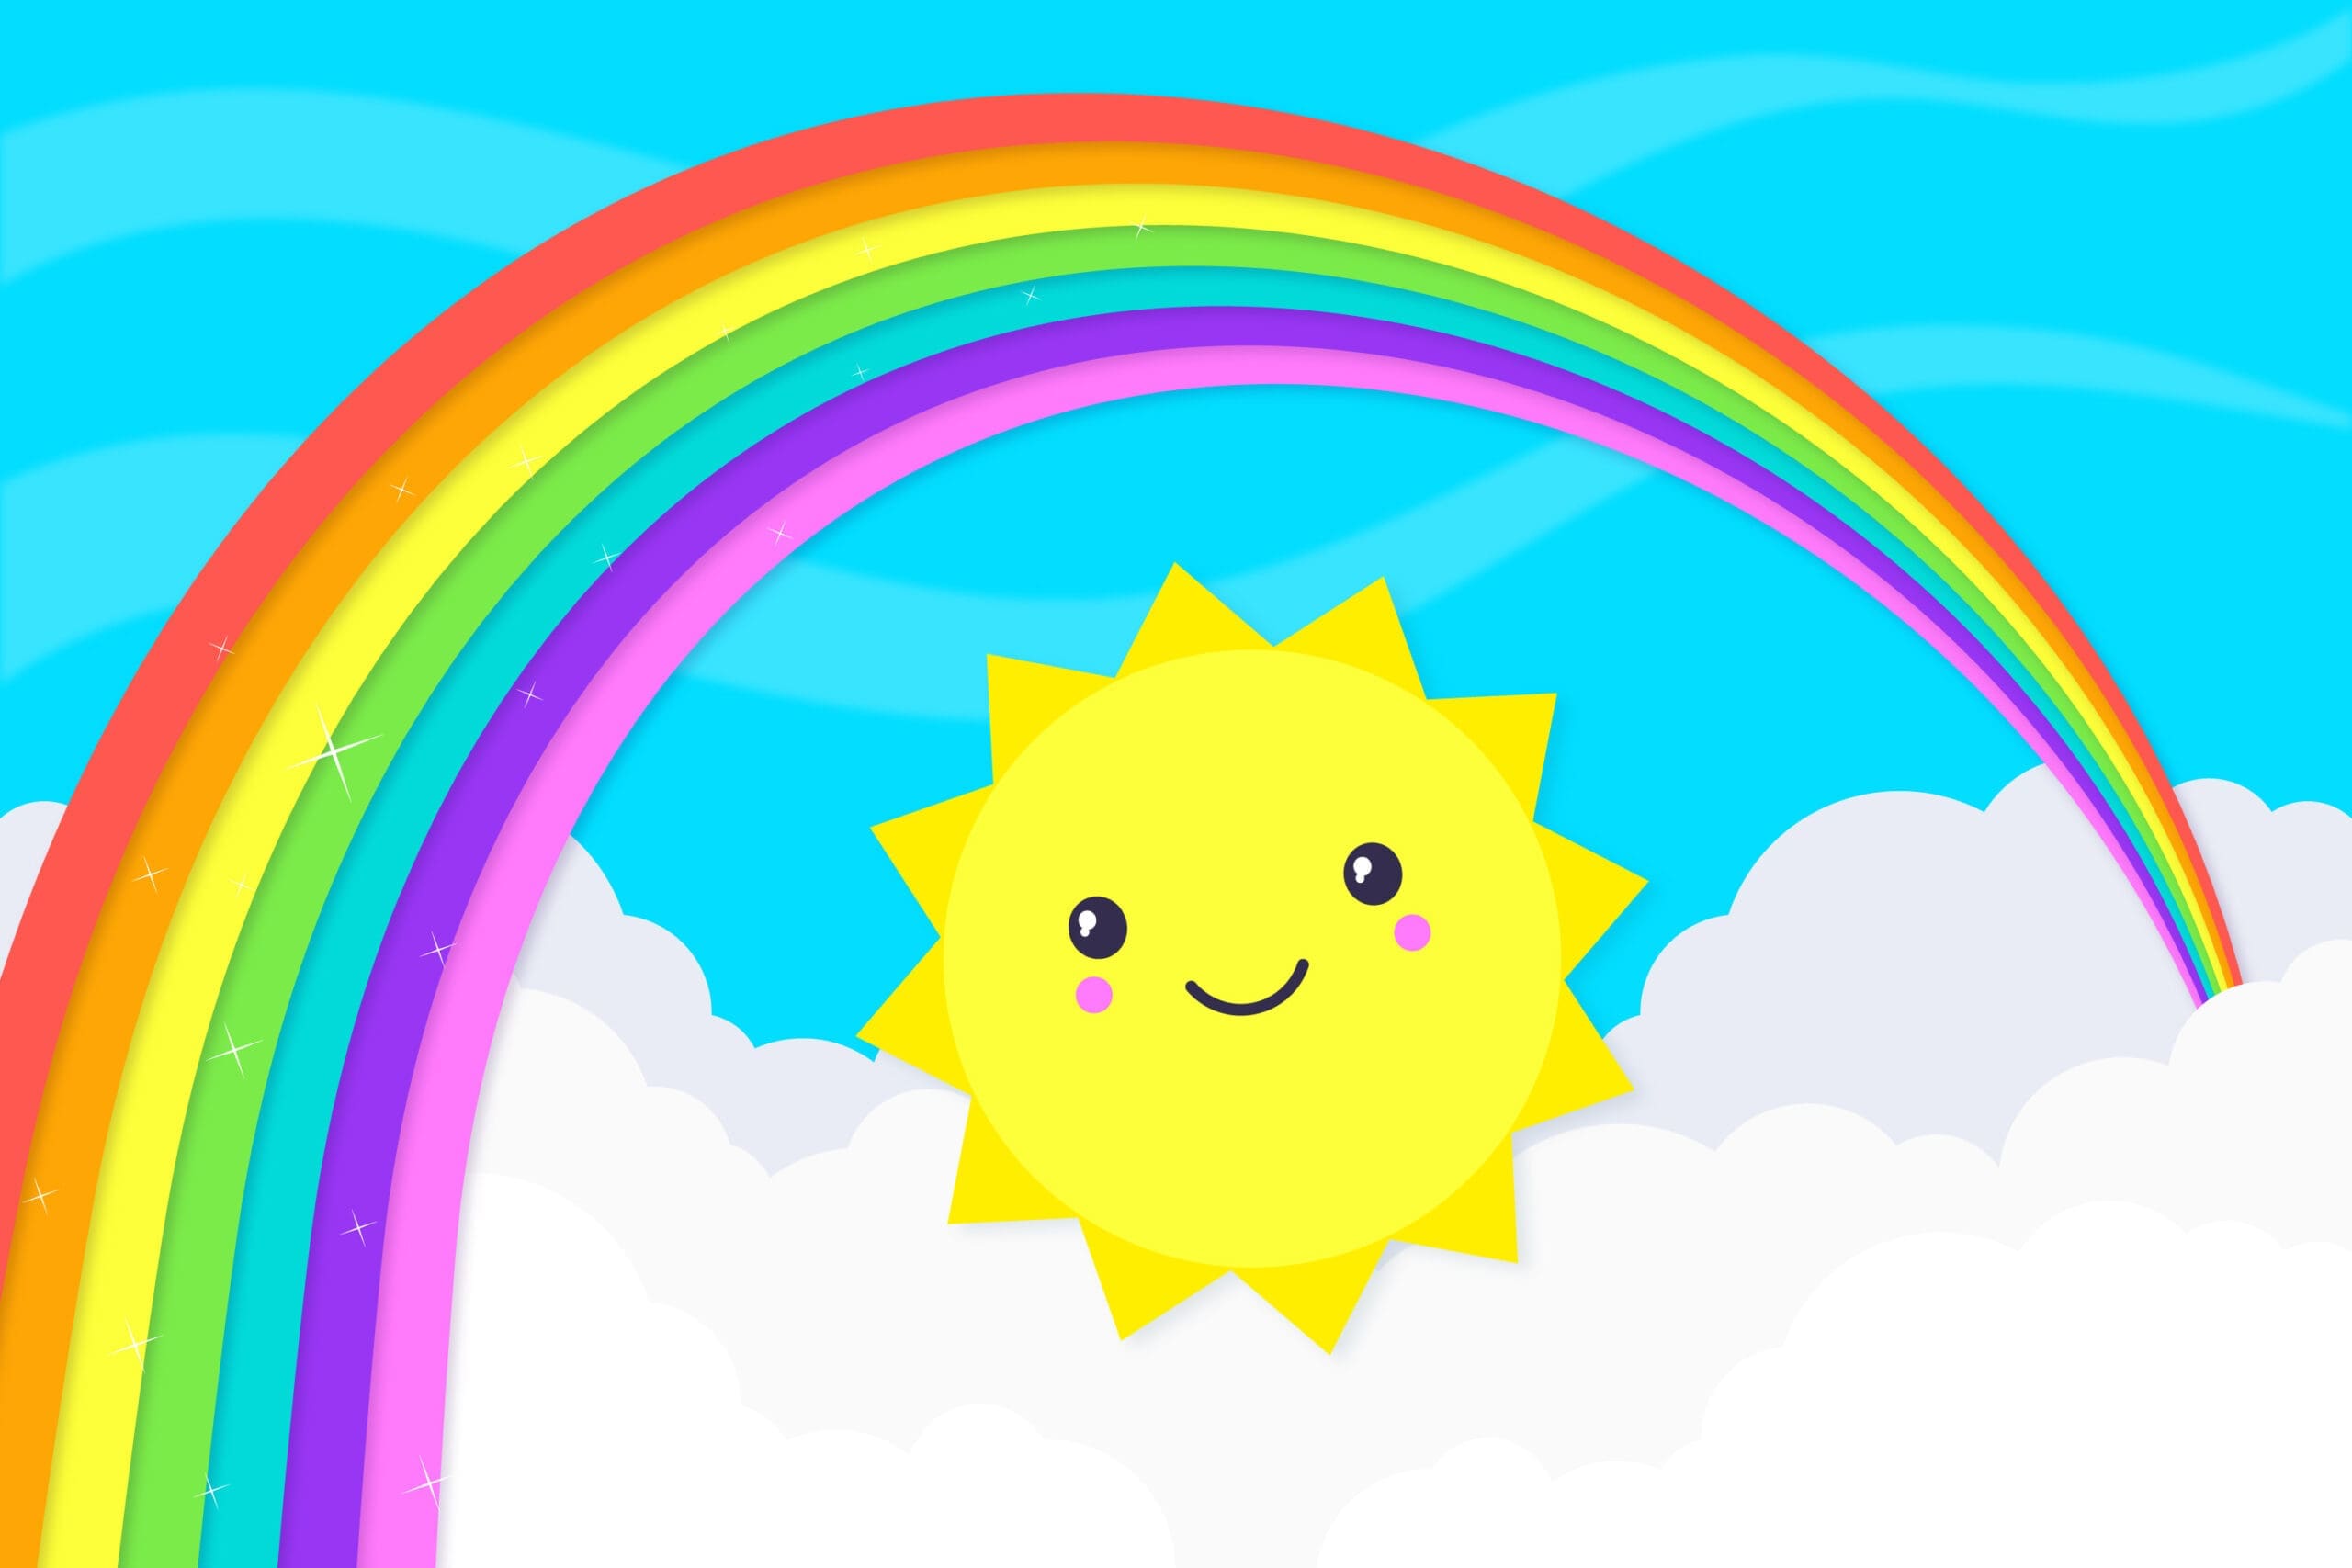 Cartoon graphic of a cheerful rainbow with sunglasses.